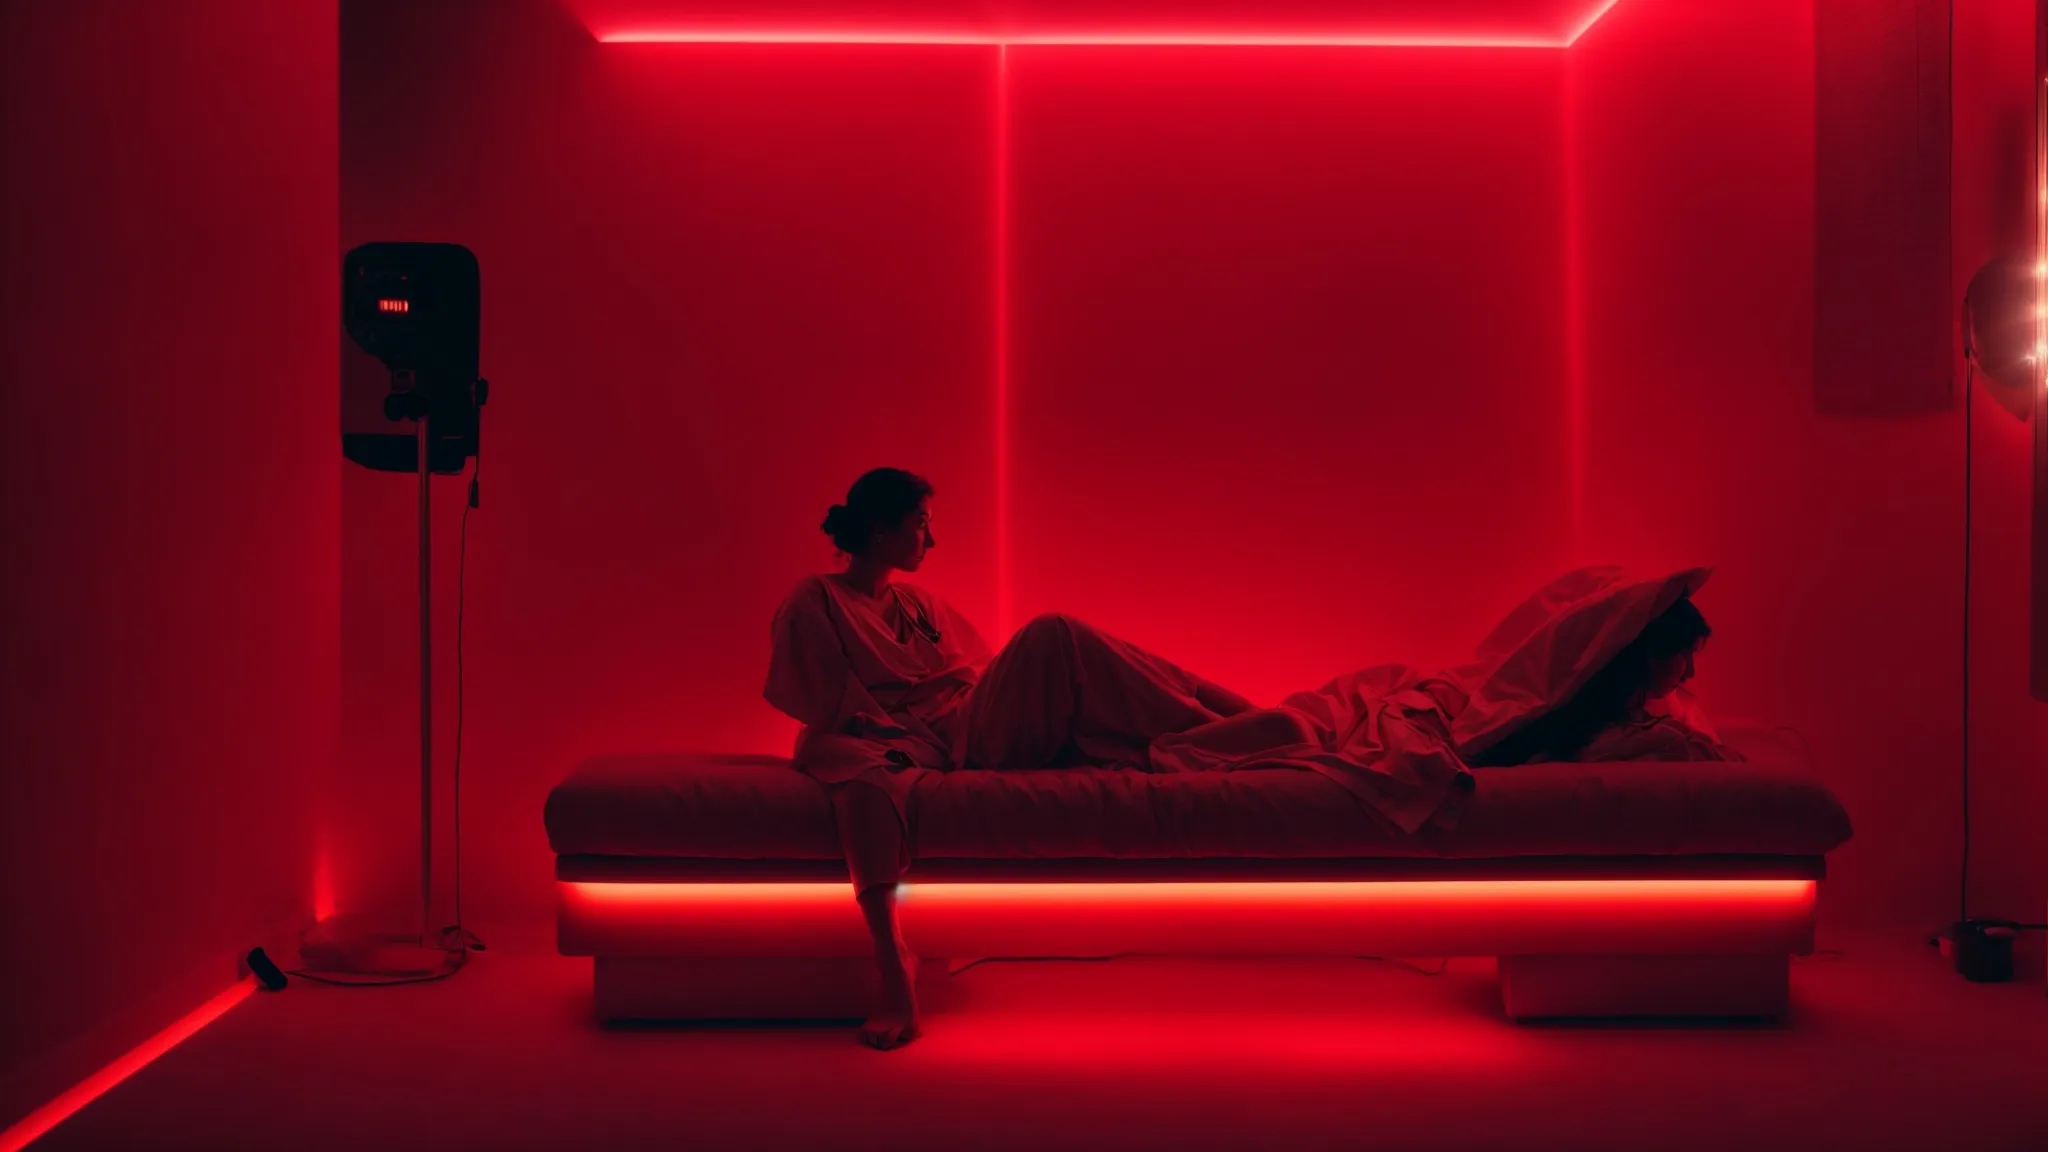 a room illuminated by the soothing glow of a red light therapy device, with a person visibly relaxed as they undergo treatment.